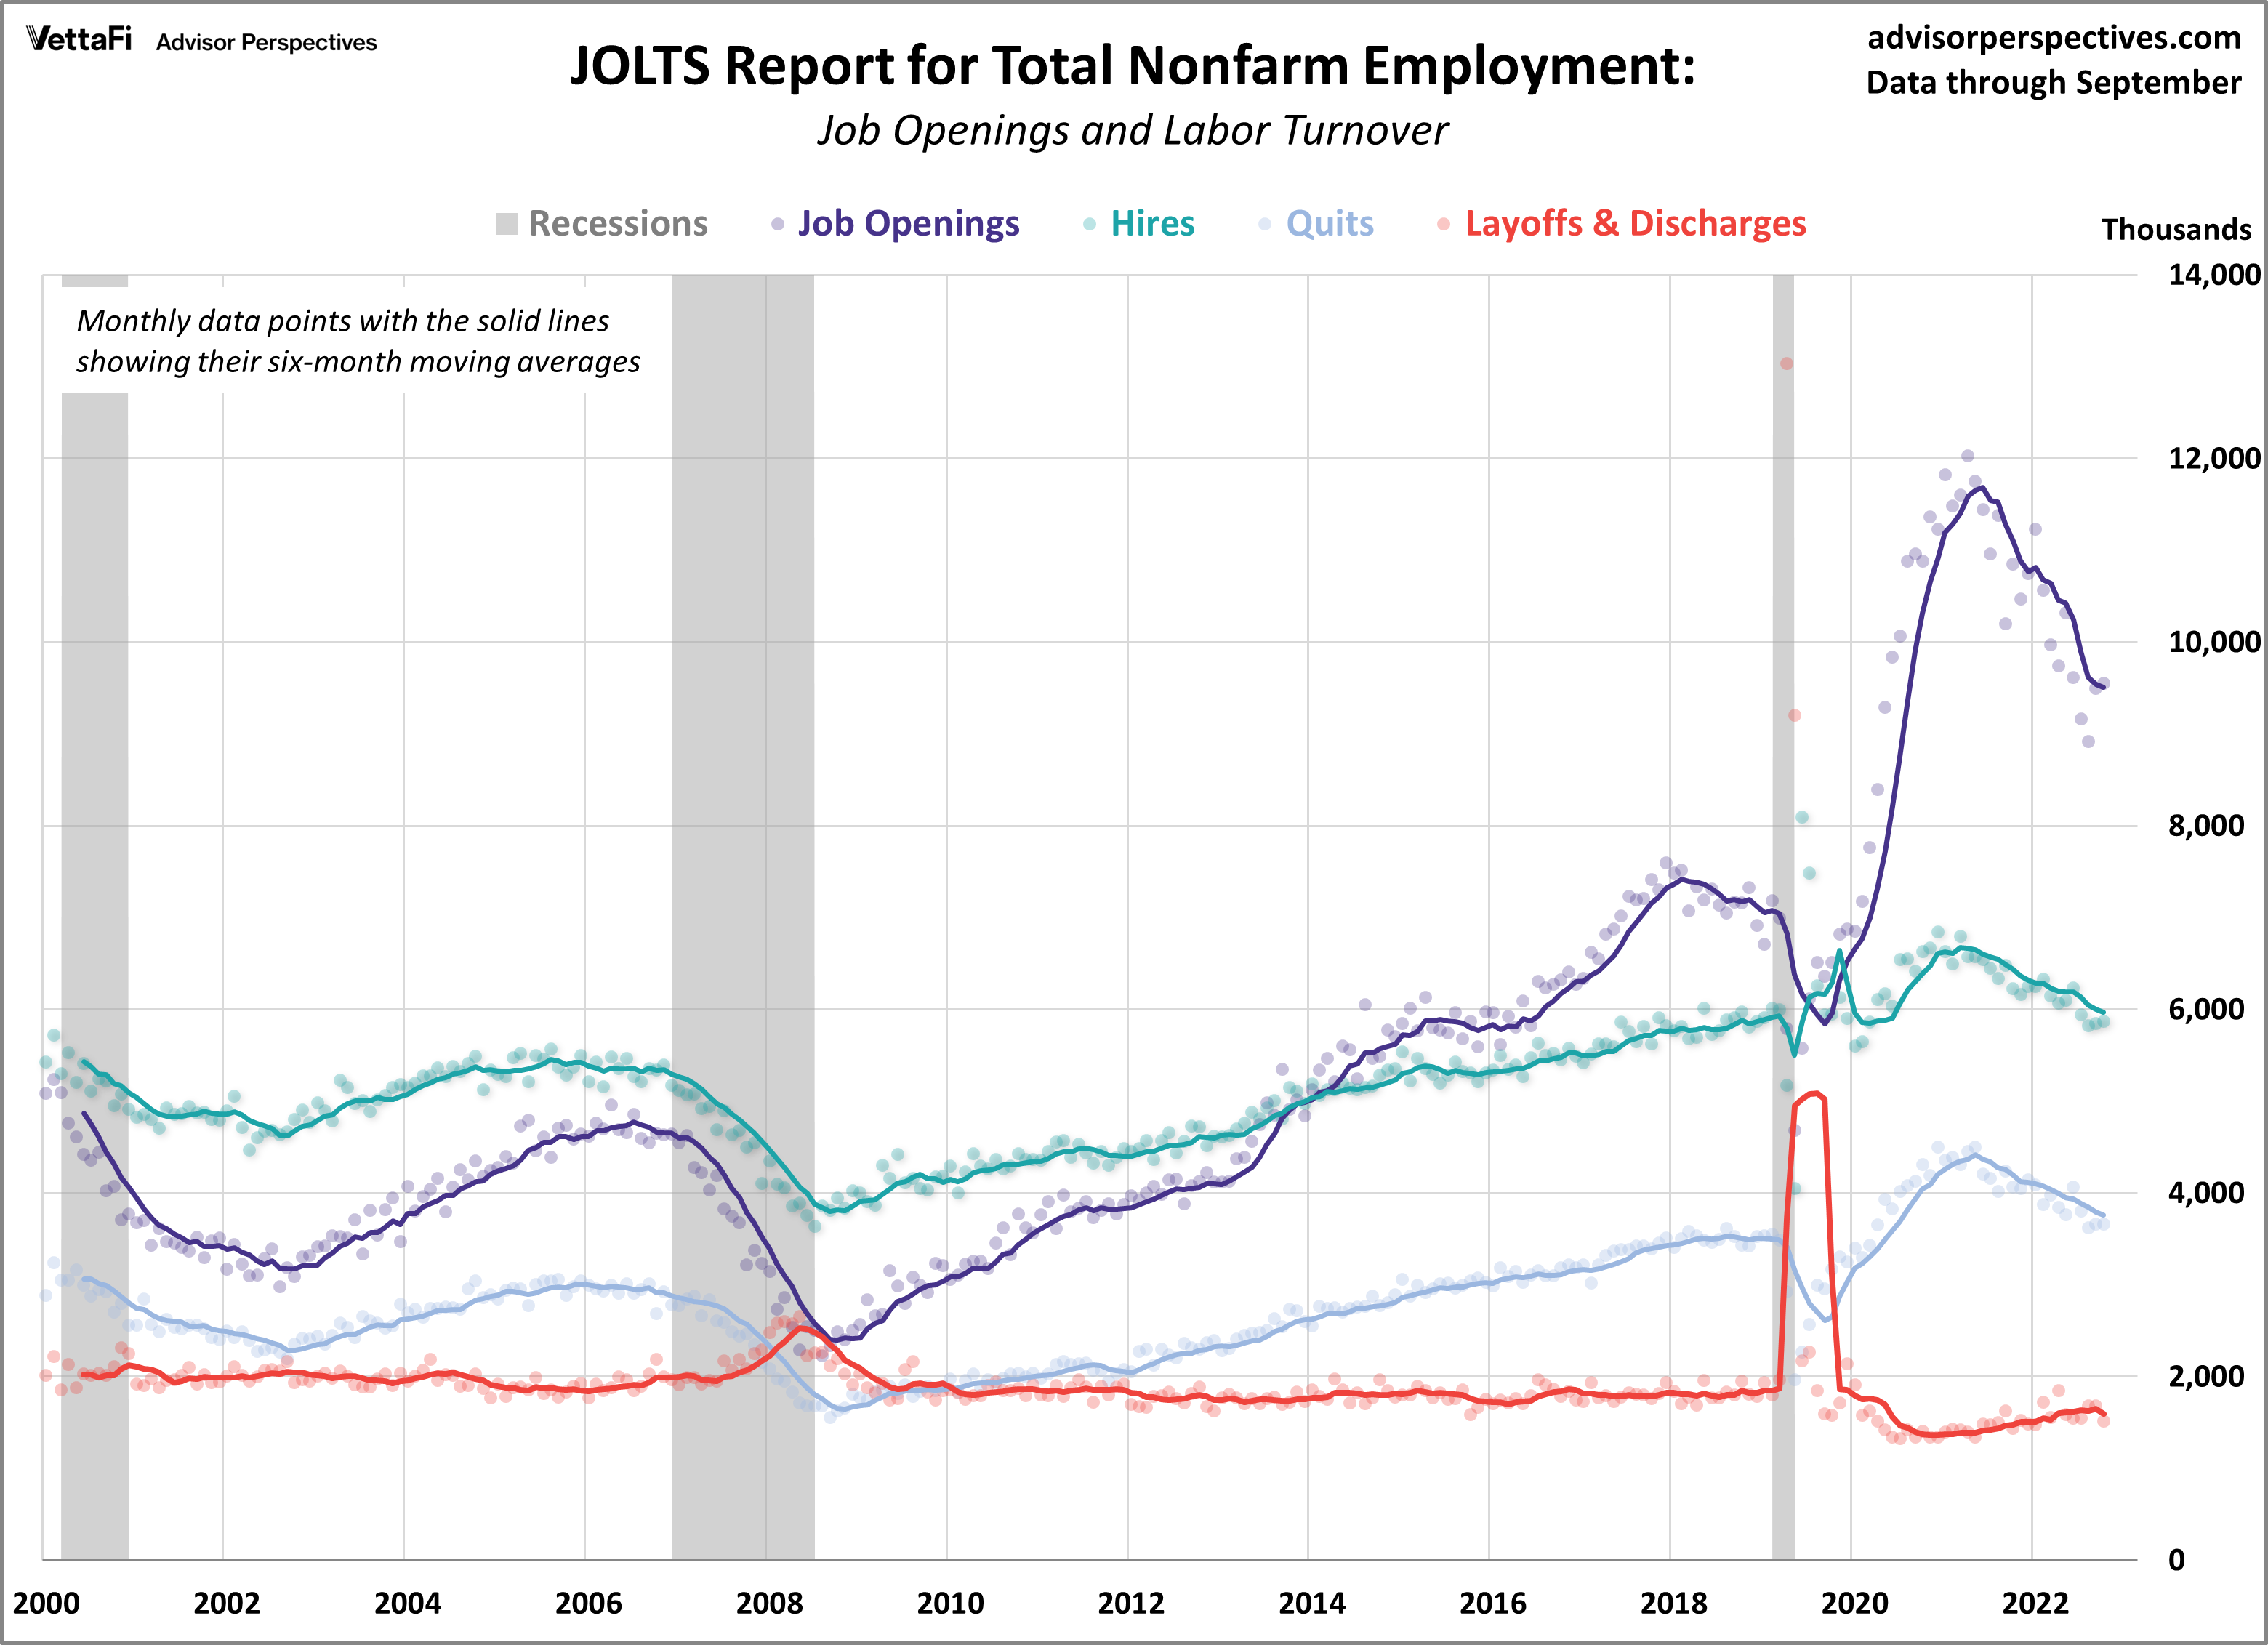 What’s Happening in the Labor Market?